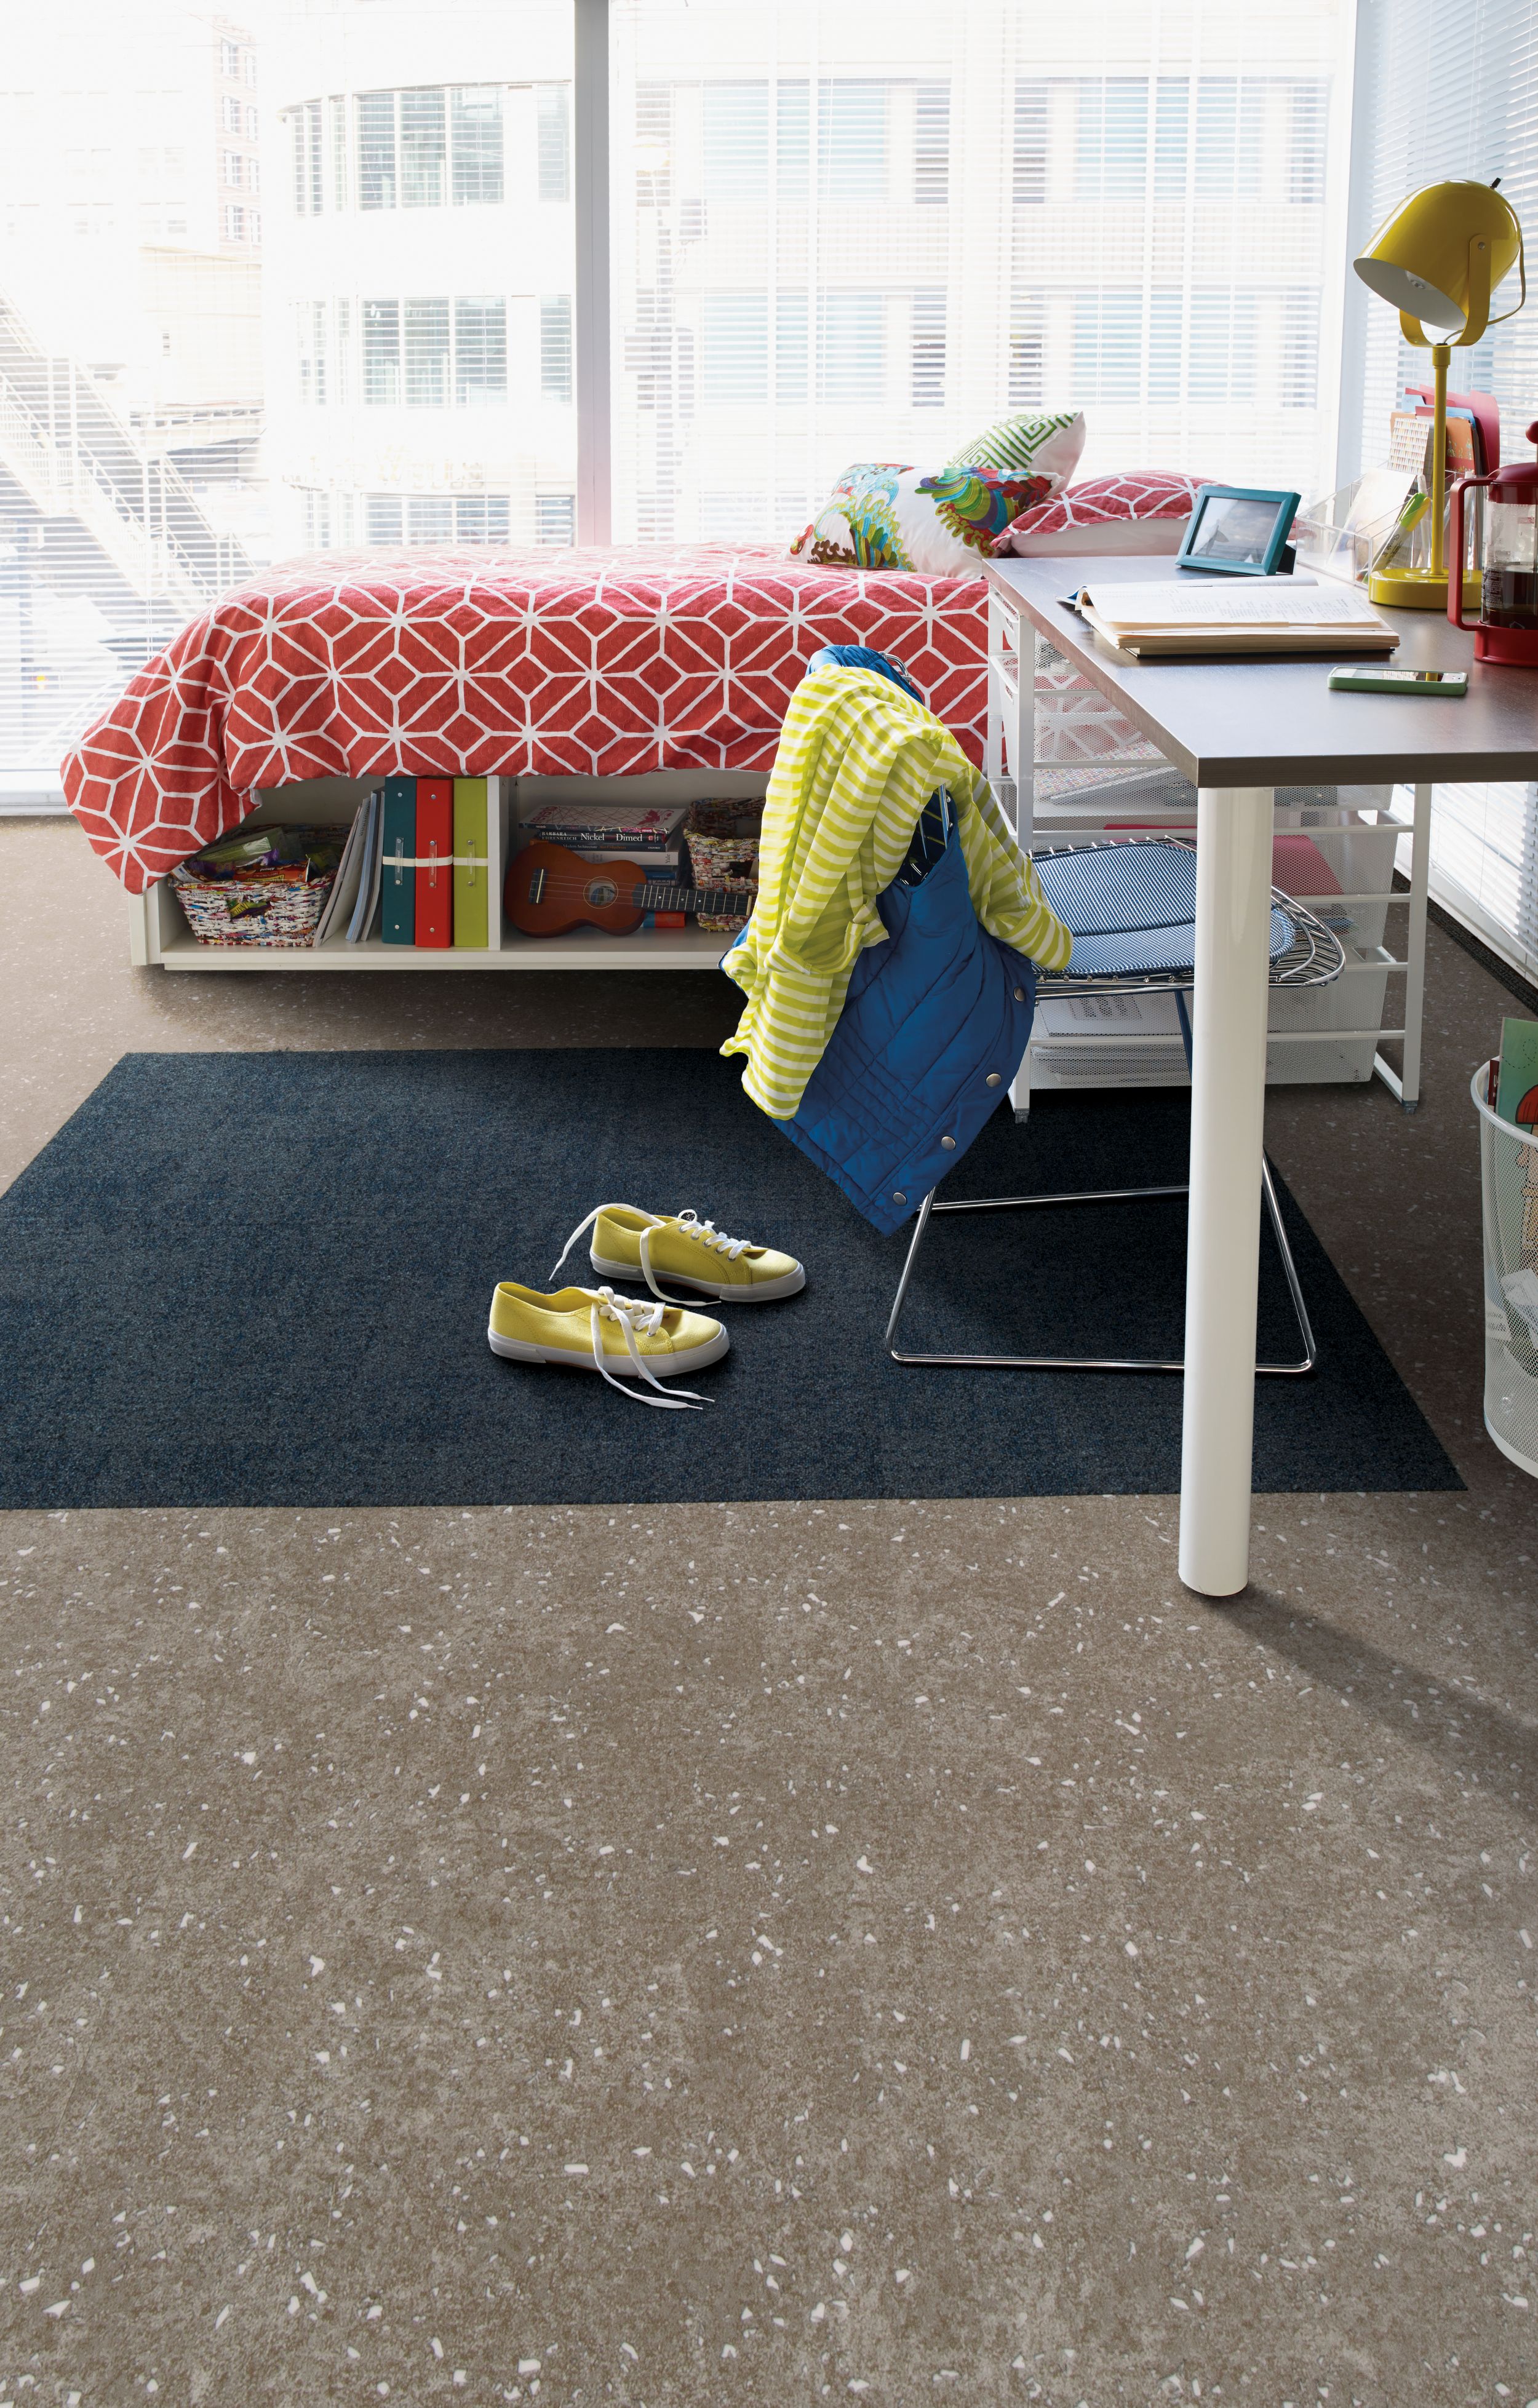 Interface Step in Time carpet tile and Walk the Aisle LVT in a dorm room imagen número 6